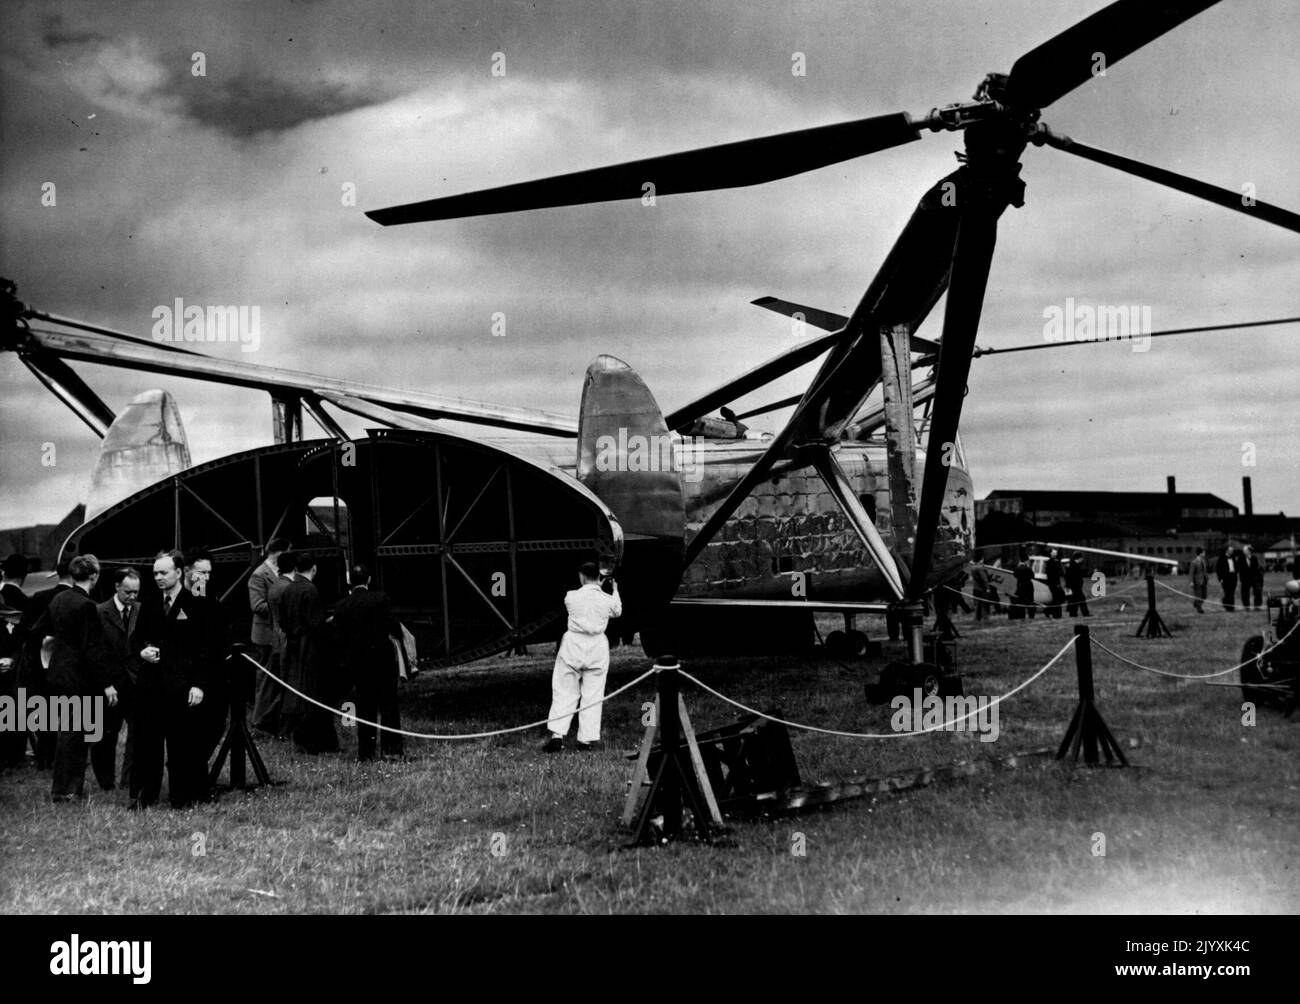 British Aircraft On Show To The World -- The Cierva Helicopter W-11 'Air Horse', with tail opened, at the exhibition. It carries 24 passengers. The annual exhibition of the Society of British Aircraft Constructors, which opened yesterday at Farnborough, Hampshire, introduced some of the latest British aircraft to the public and the world. September 8, 1948. (Photo by Fox Photos). Stock Photo